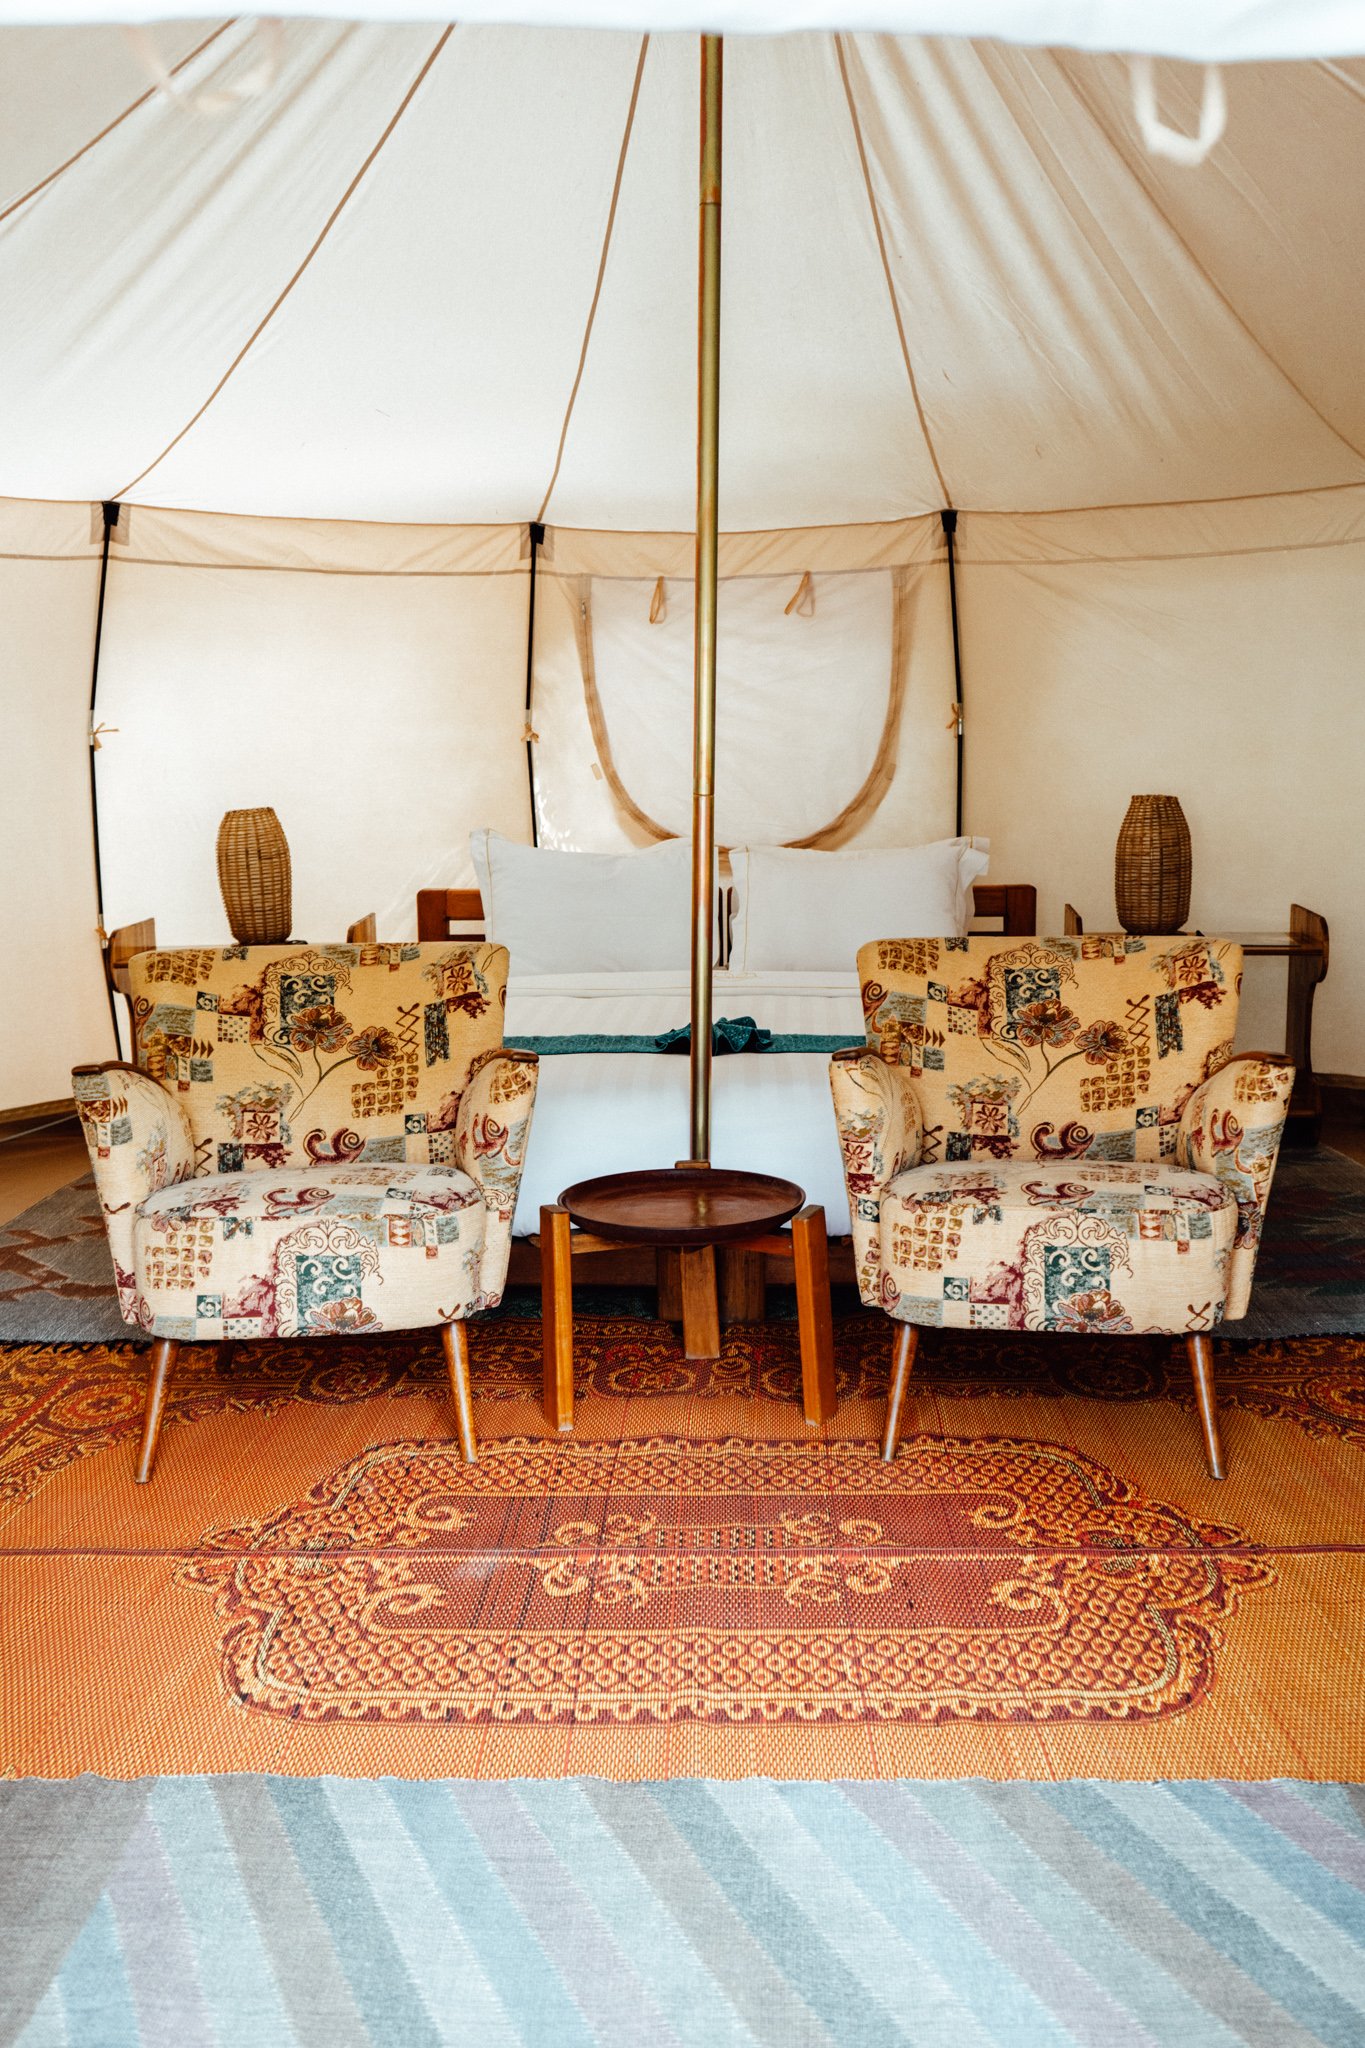 interior shot of a tent in Nam Khan Ecolodge